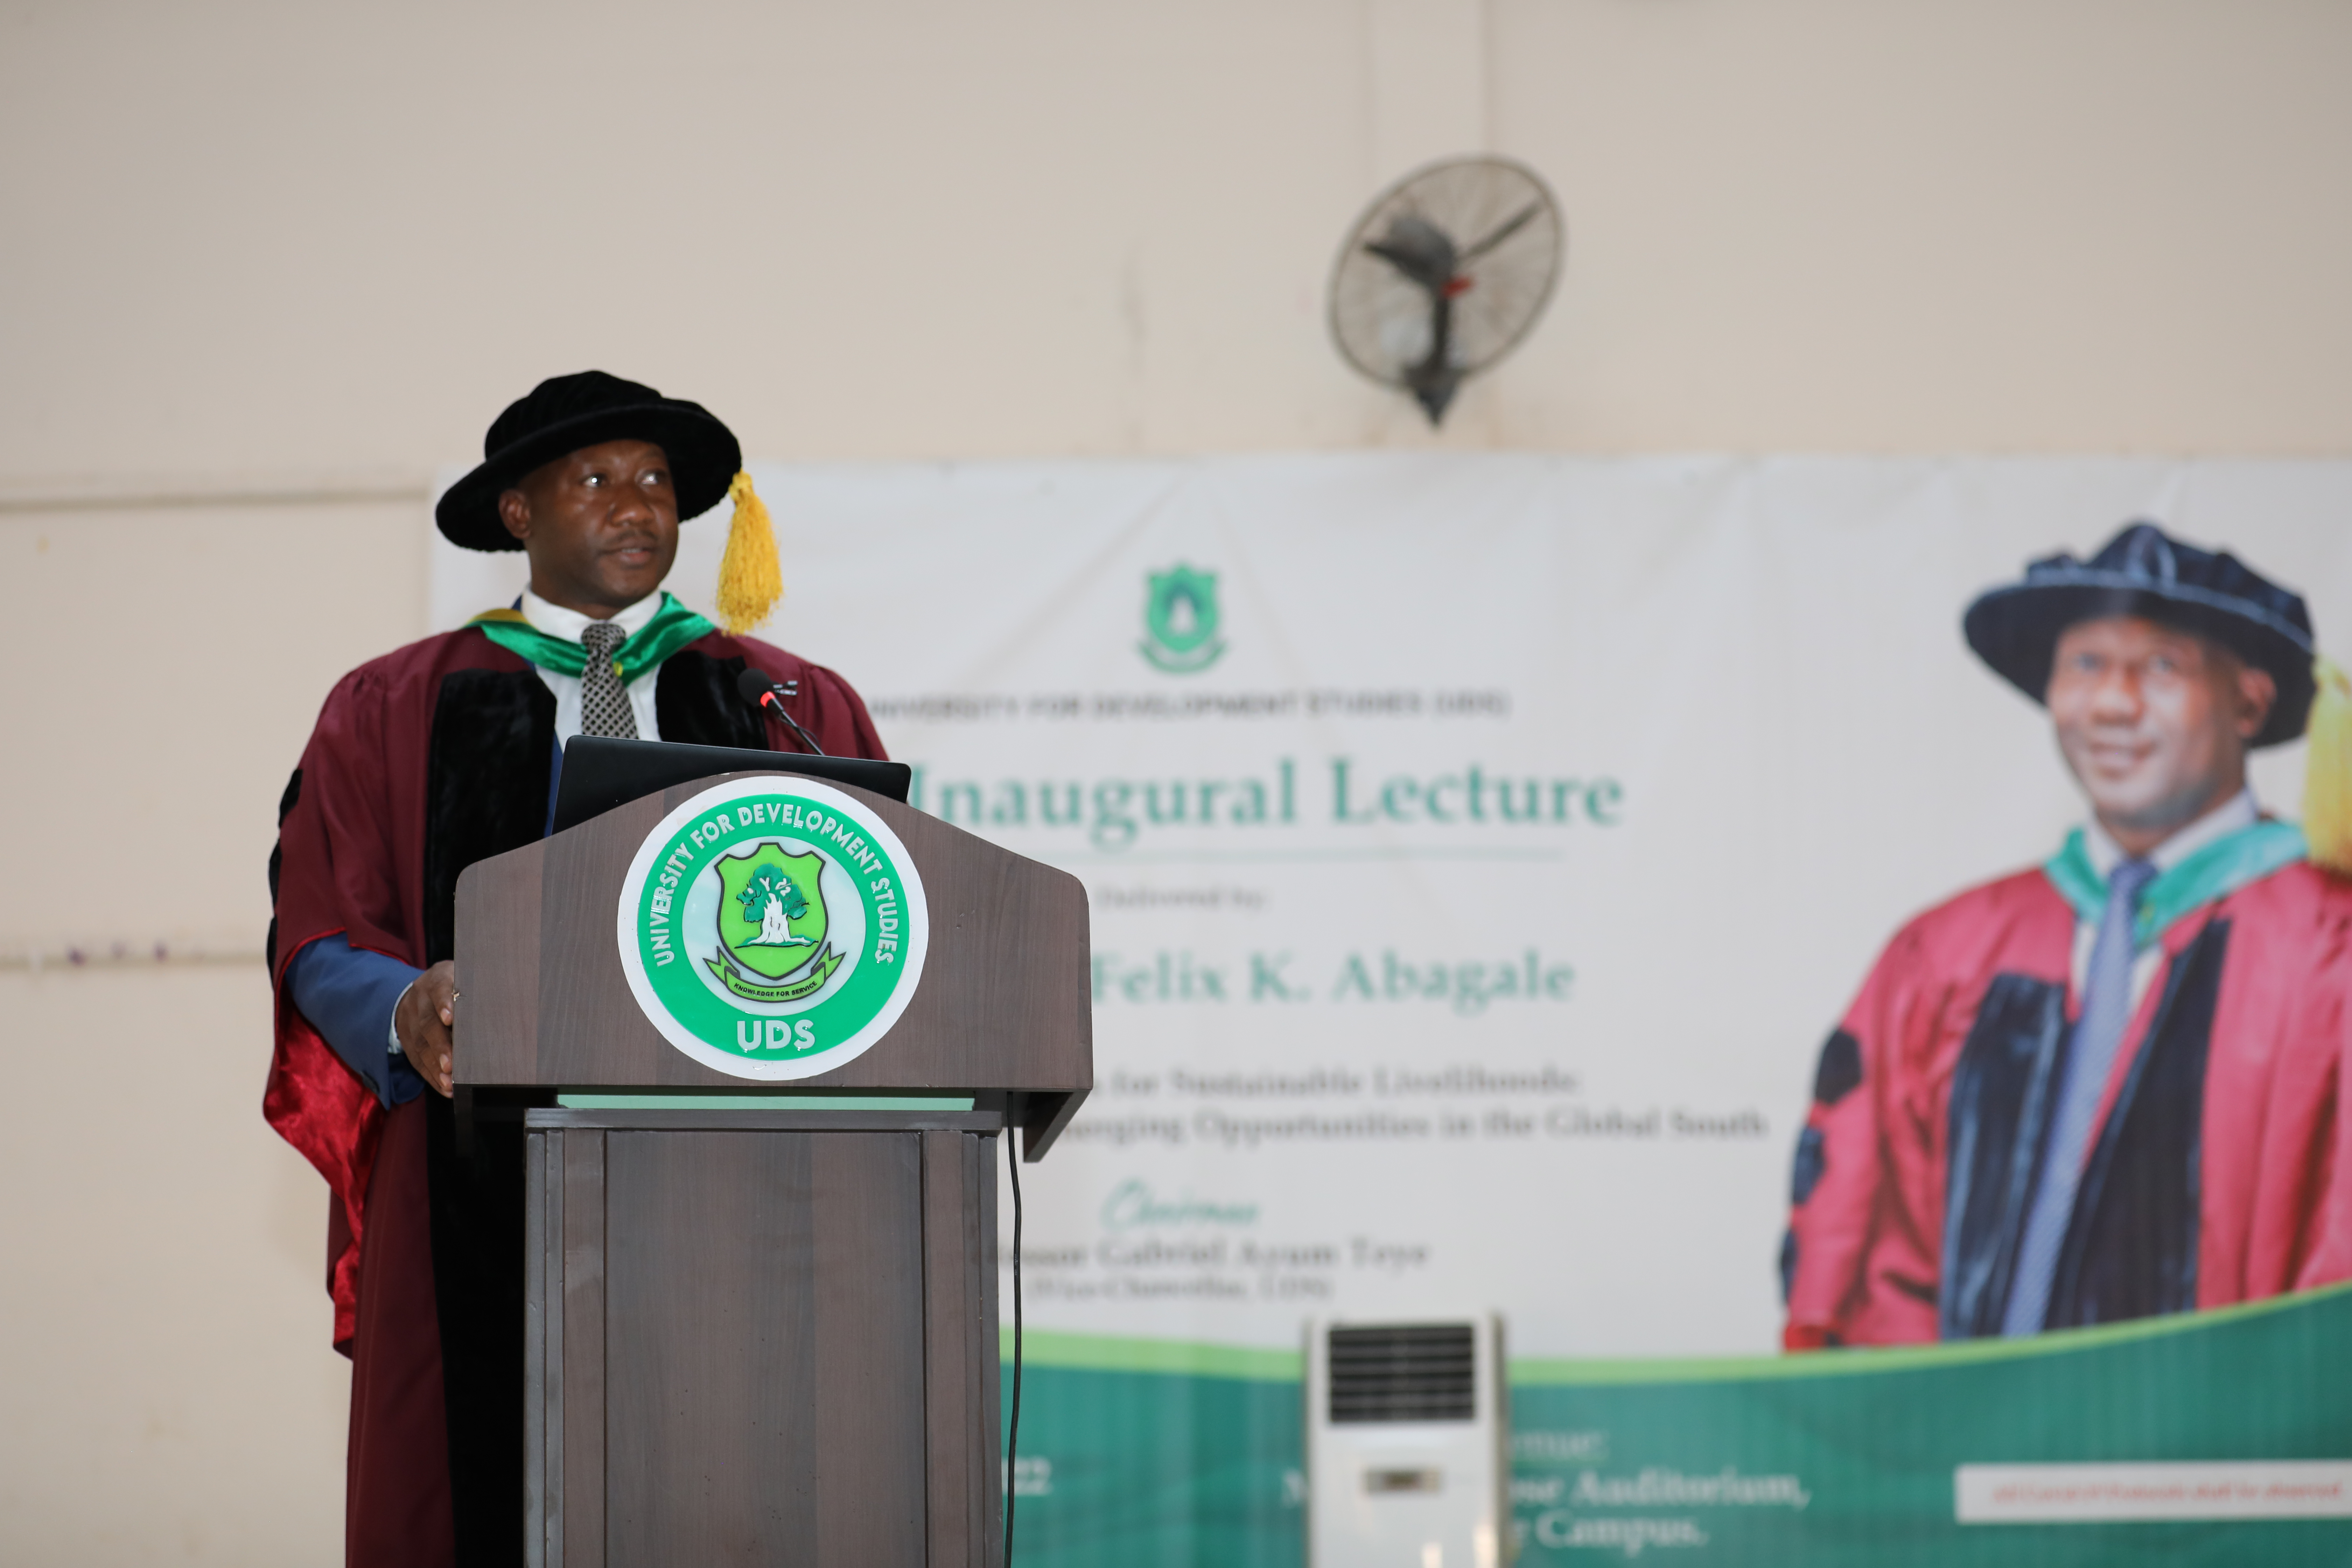 10th Inaugural Lecture, By Prof. Felix K. Abagale